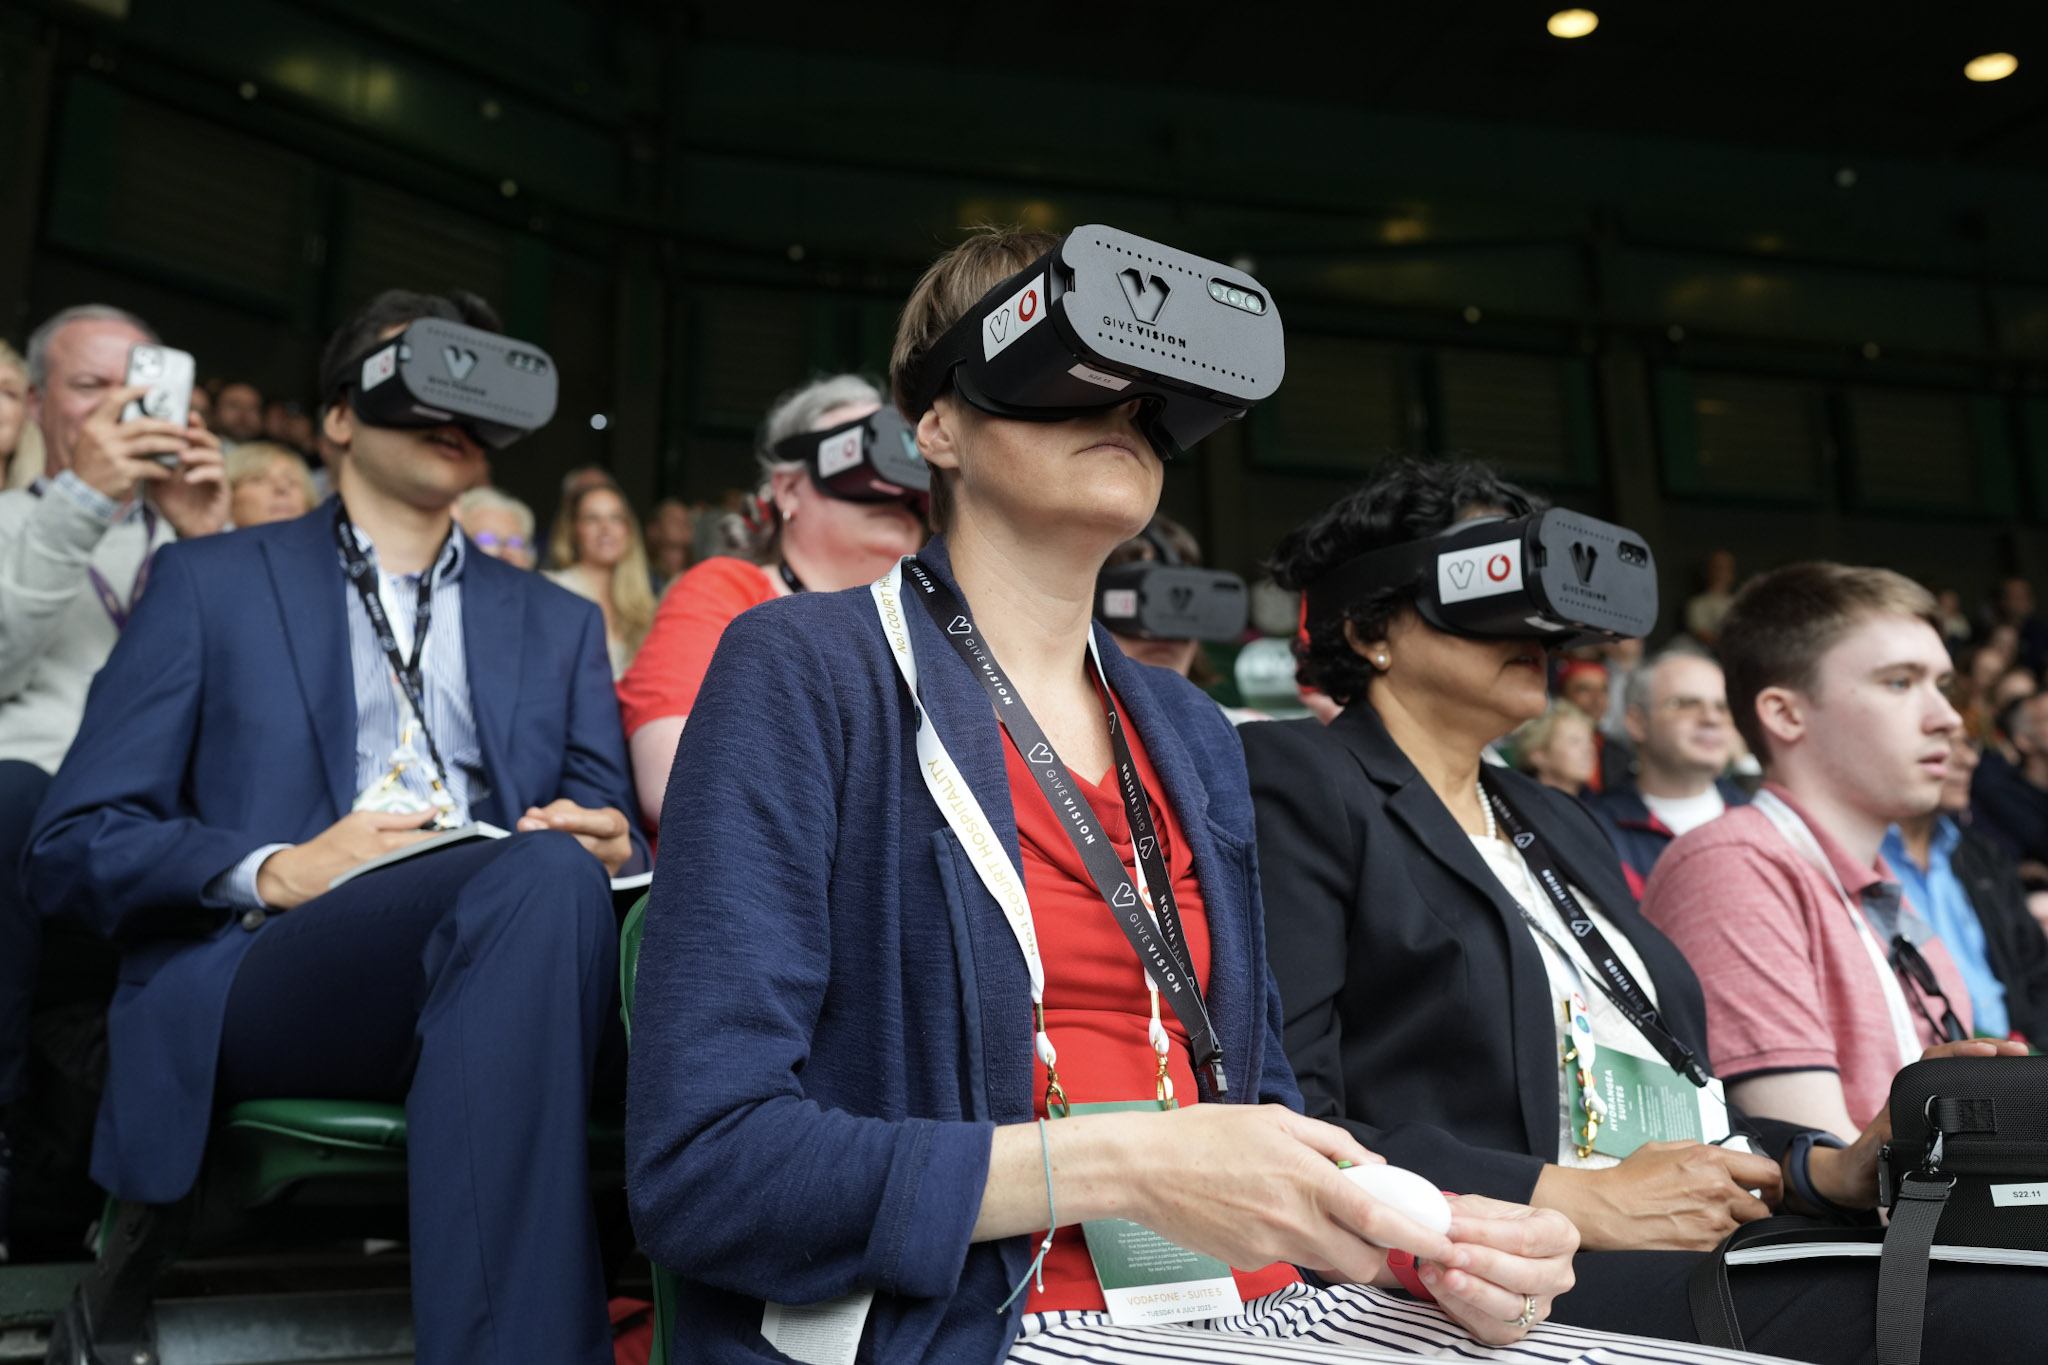 visually impaired tennis fans in their seats at Wimbledon wearing GiveVision headsets powered by Vodafone 5G